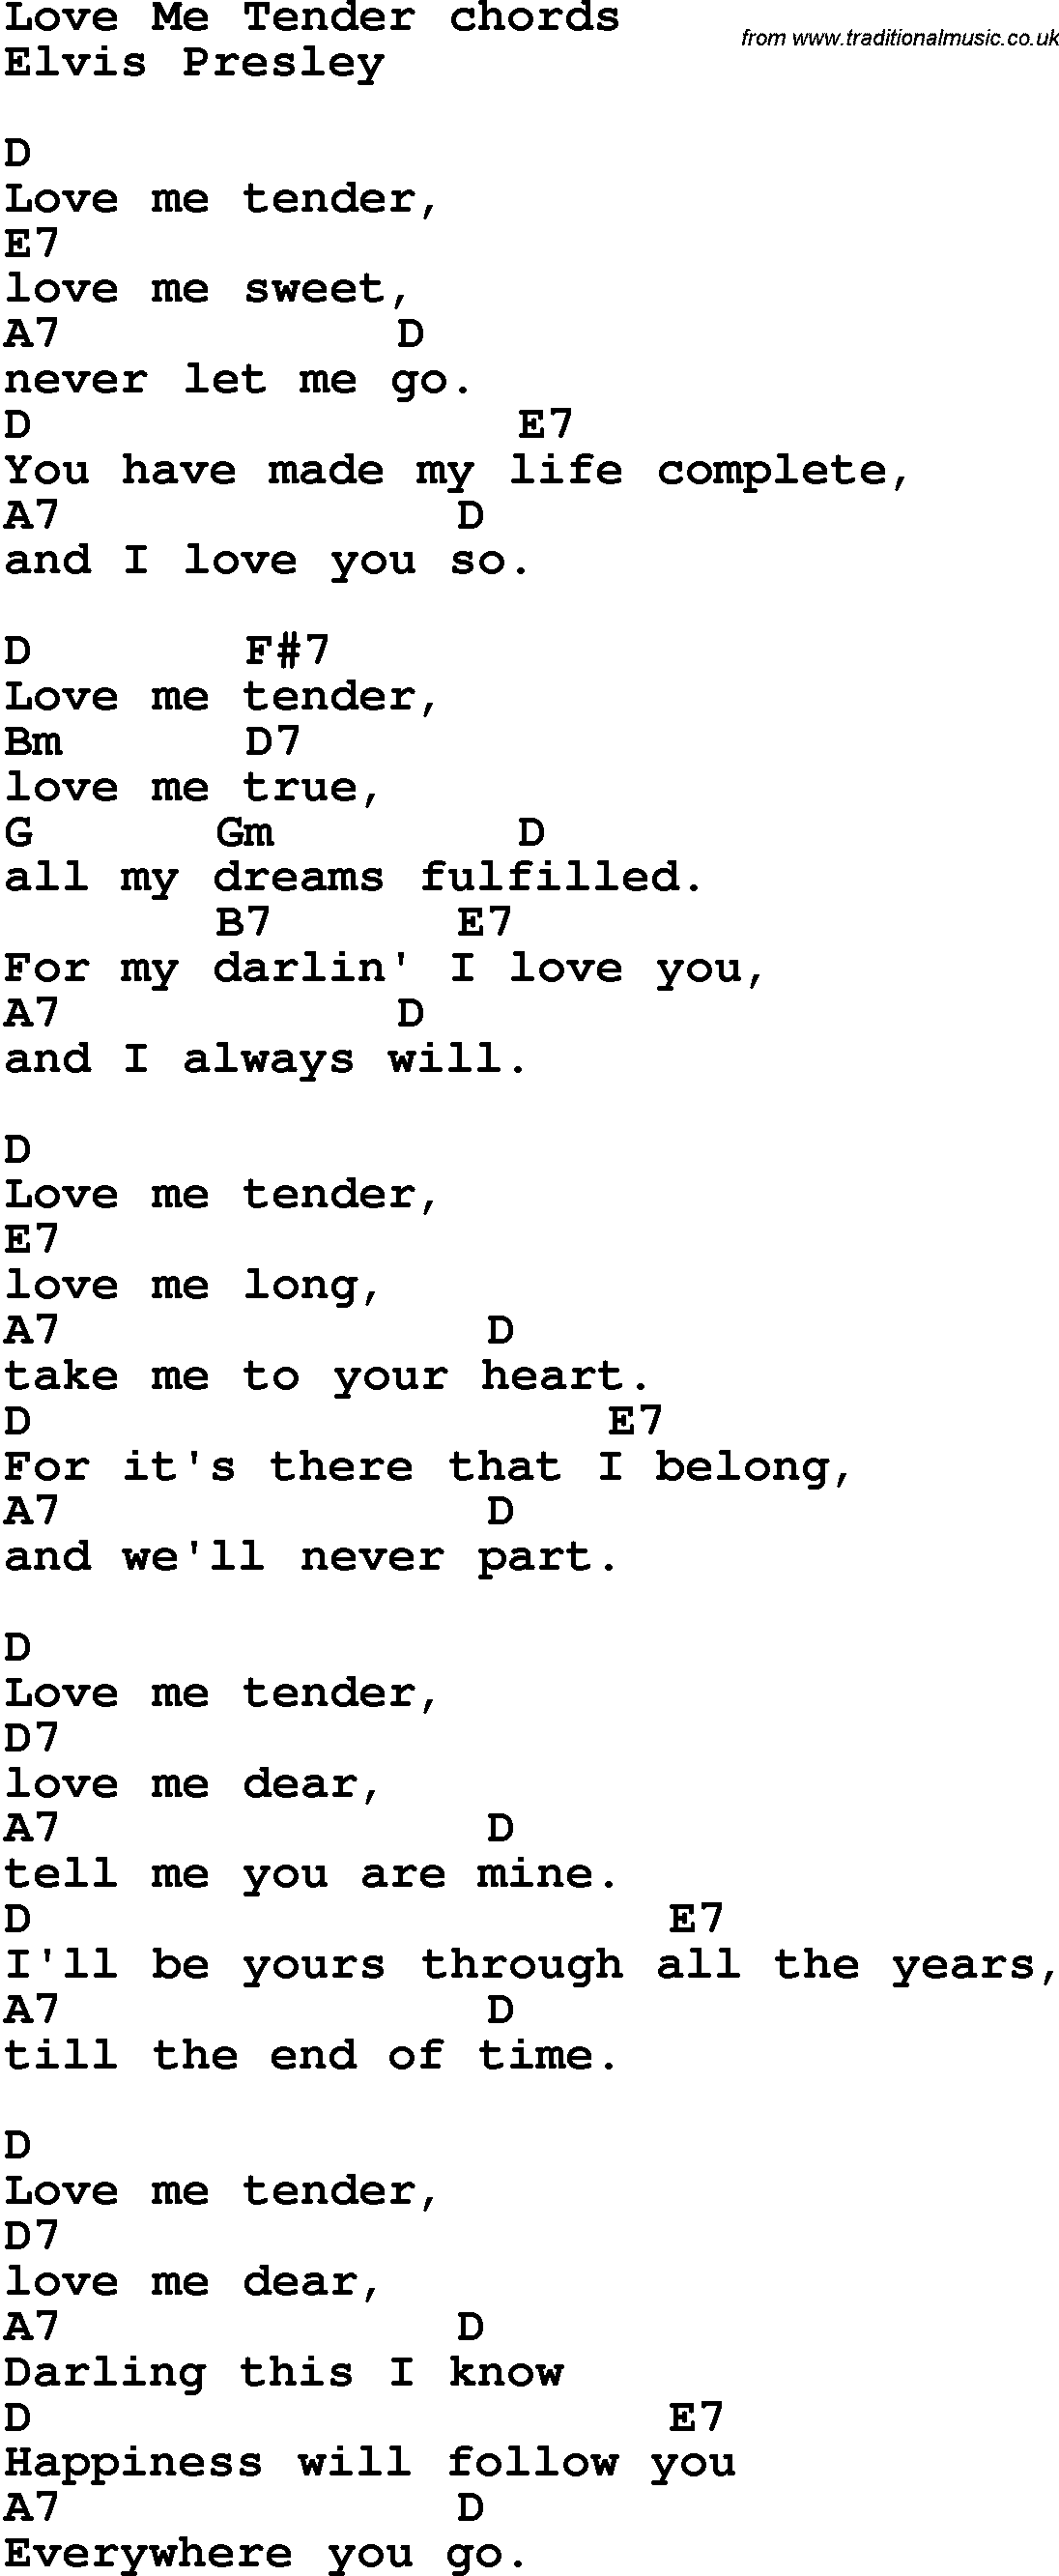 Song Lyrics with guitar chords for Love Me Tender